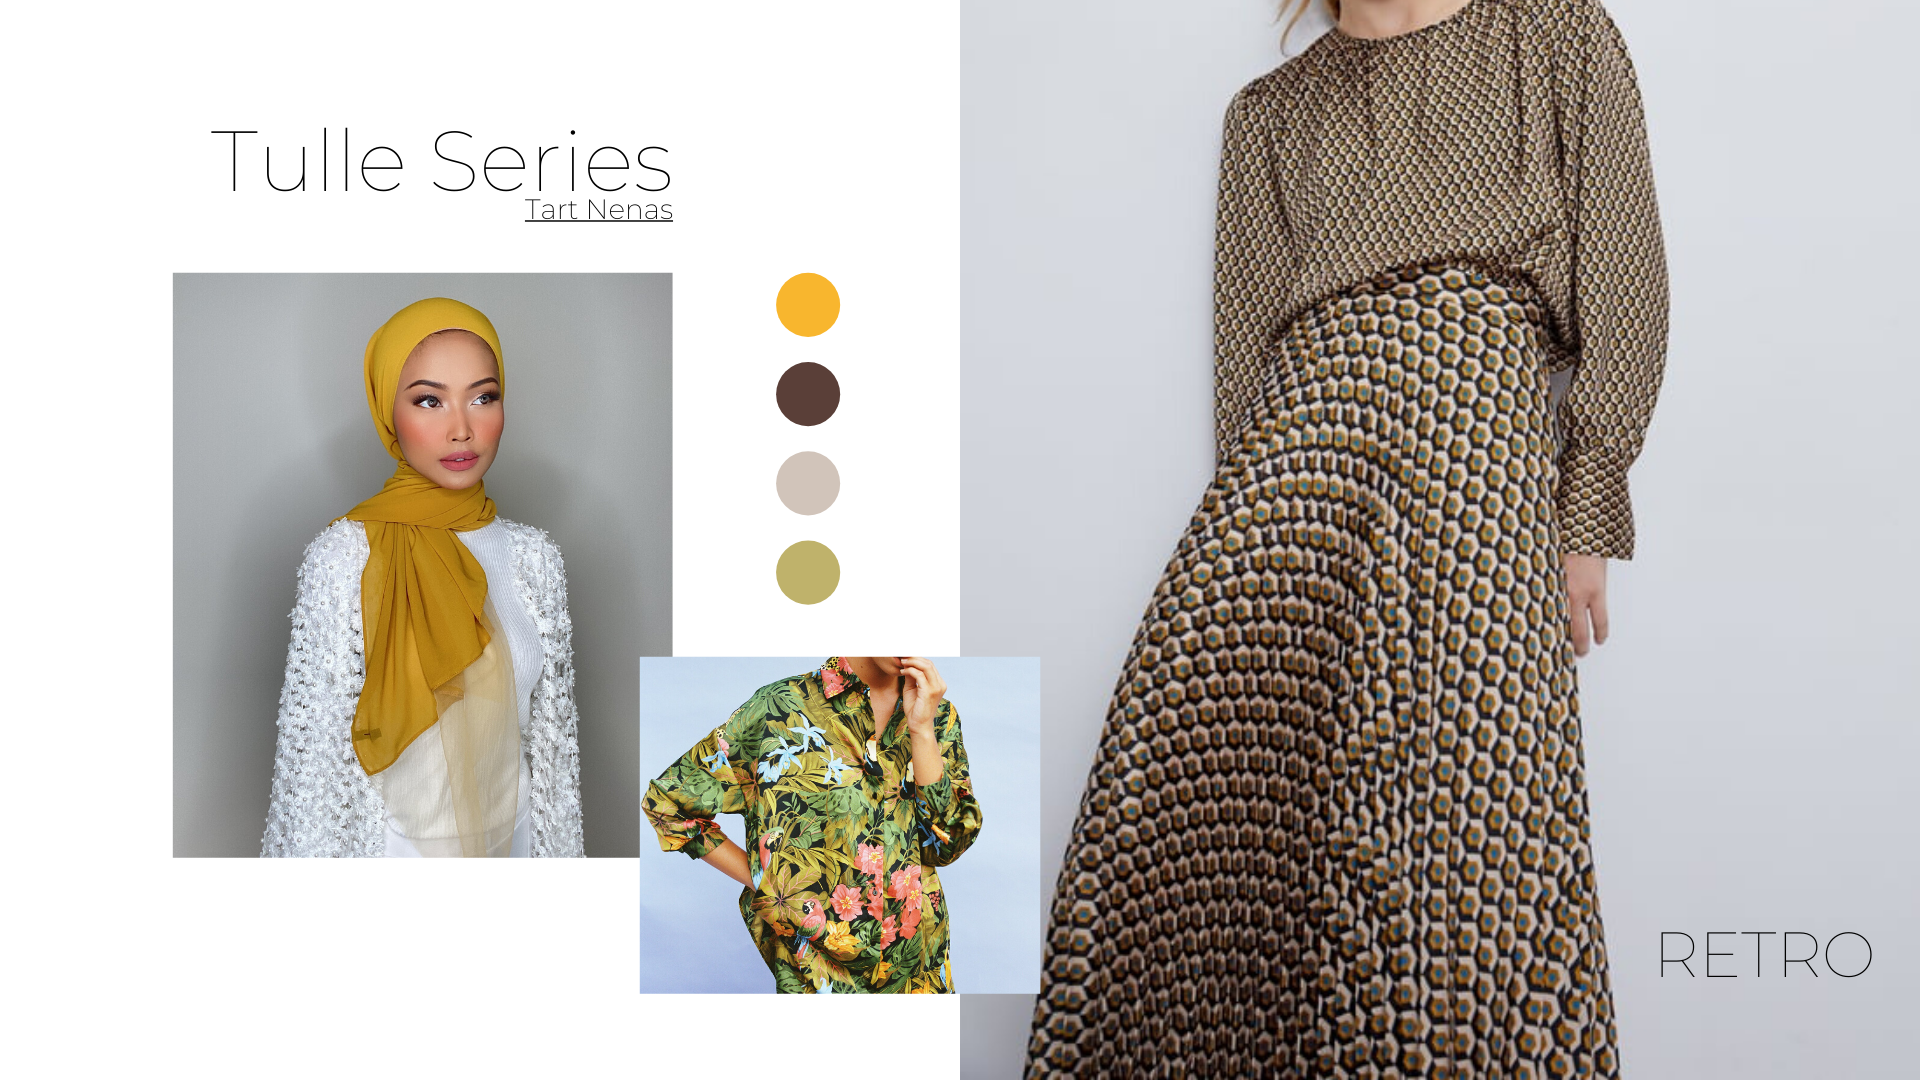 acupofdee, bloom, florals, hijab, modest fashion, style tip, lookbook, tulle series, yellow, retro, abstract, topical,